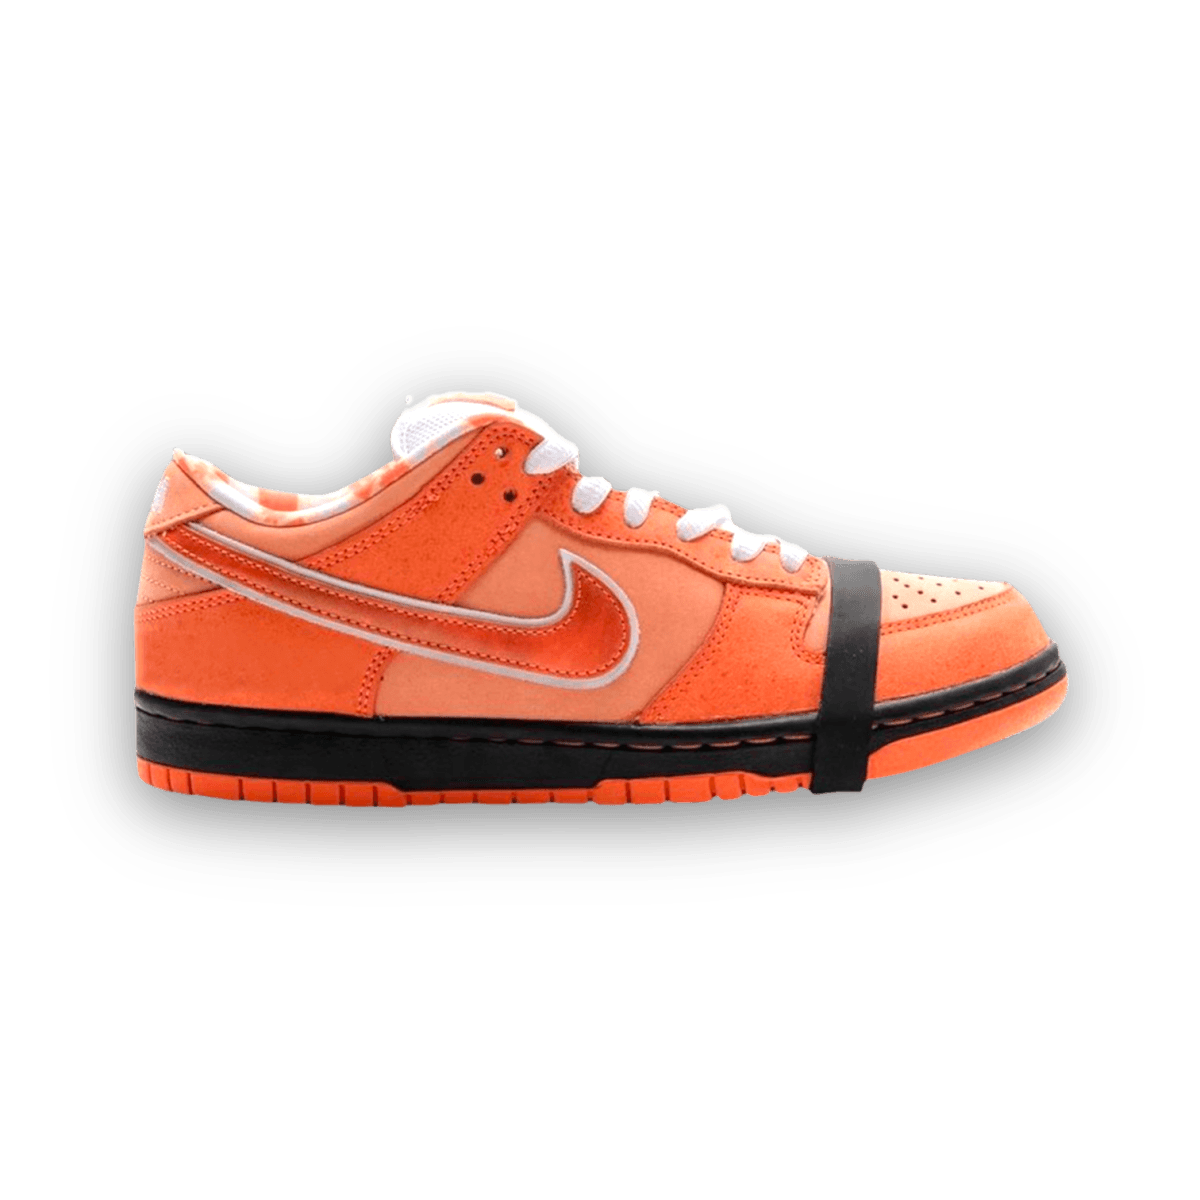 Concepts x Dunk Low SB 'Orange Lobster' - Low Sneaker - Dunks - Jawns on Fire